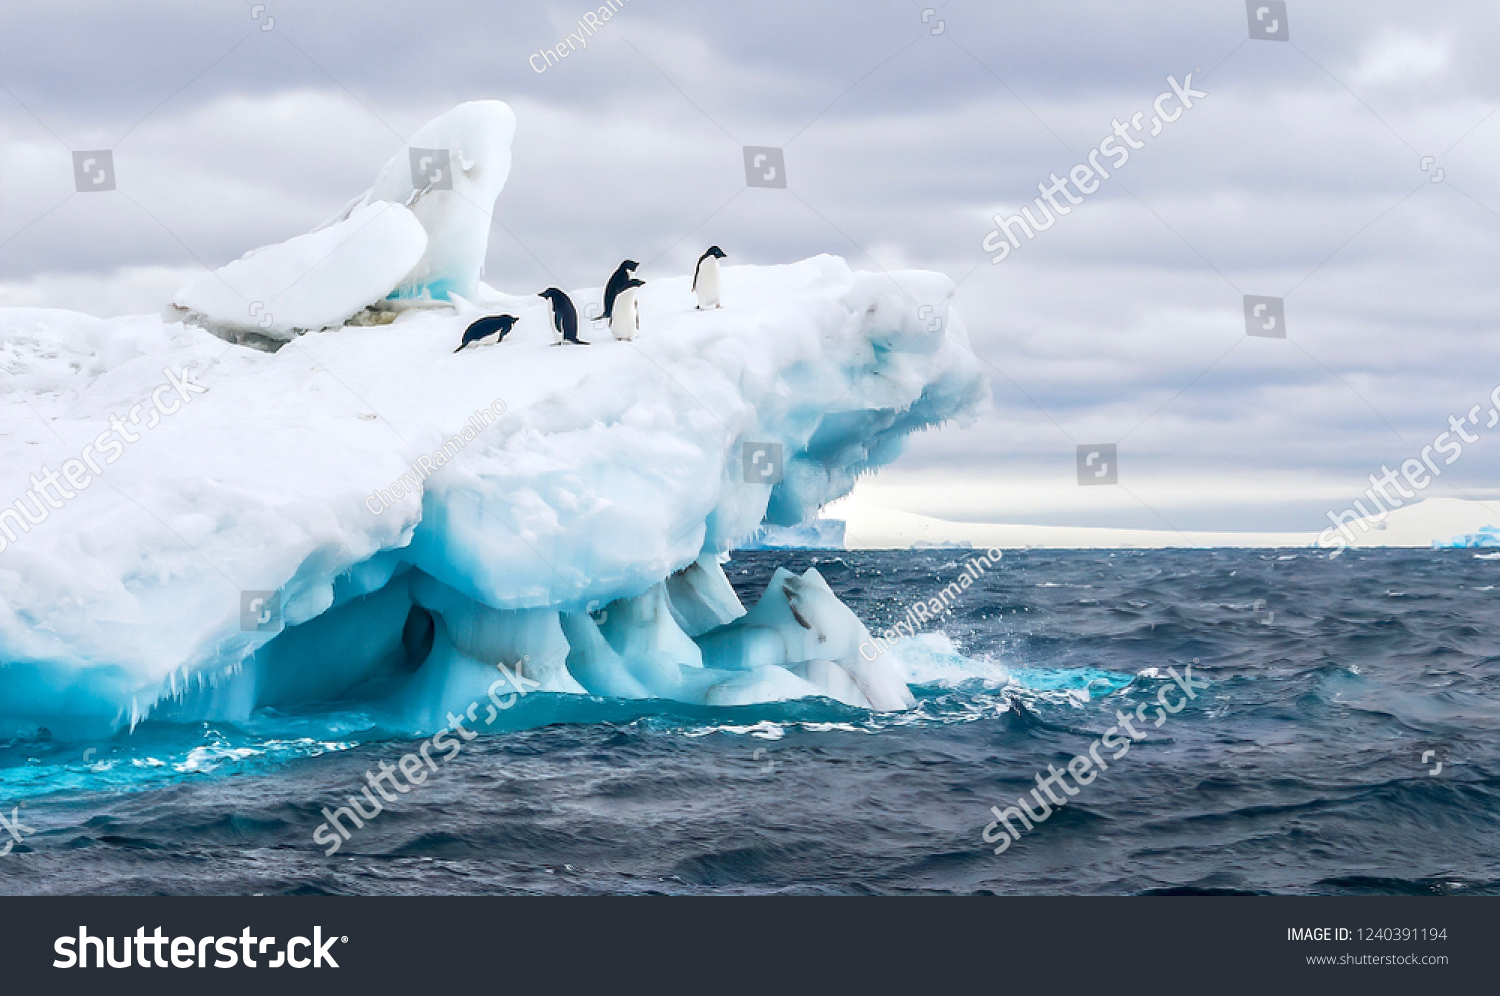 An Antarctica nature scene, with a group of five Adelie penguins on a floating iceberg in the icy cold waters of the Weddell Sea, near the Tabarin Peninsula, Antarctica. #1240391194